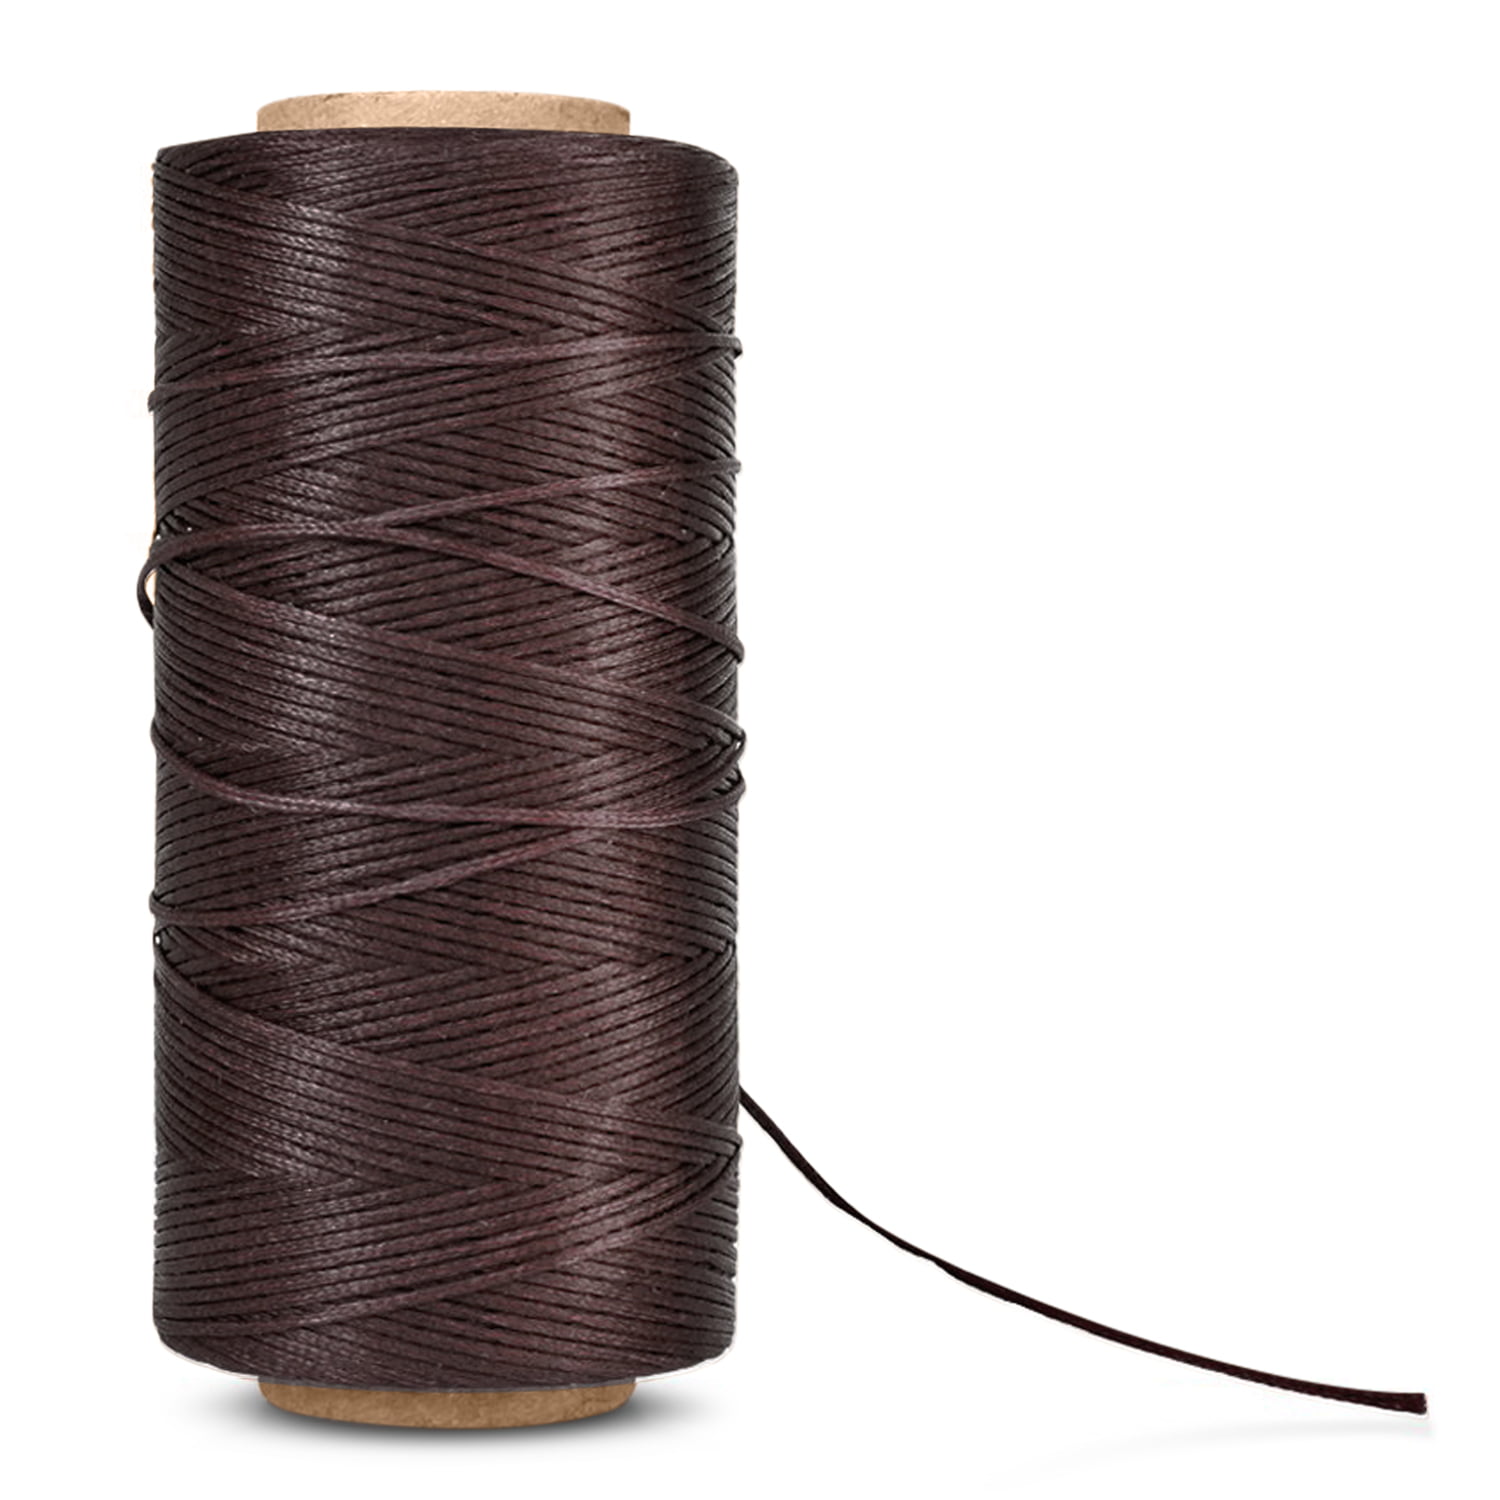 Flat Waxed Thread for Leather Sewing - Leather Thread Wax String Polyester  Cord for Leather Craft Stitching Bookbinding by Mandala Crafts